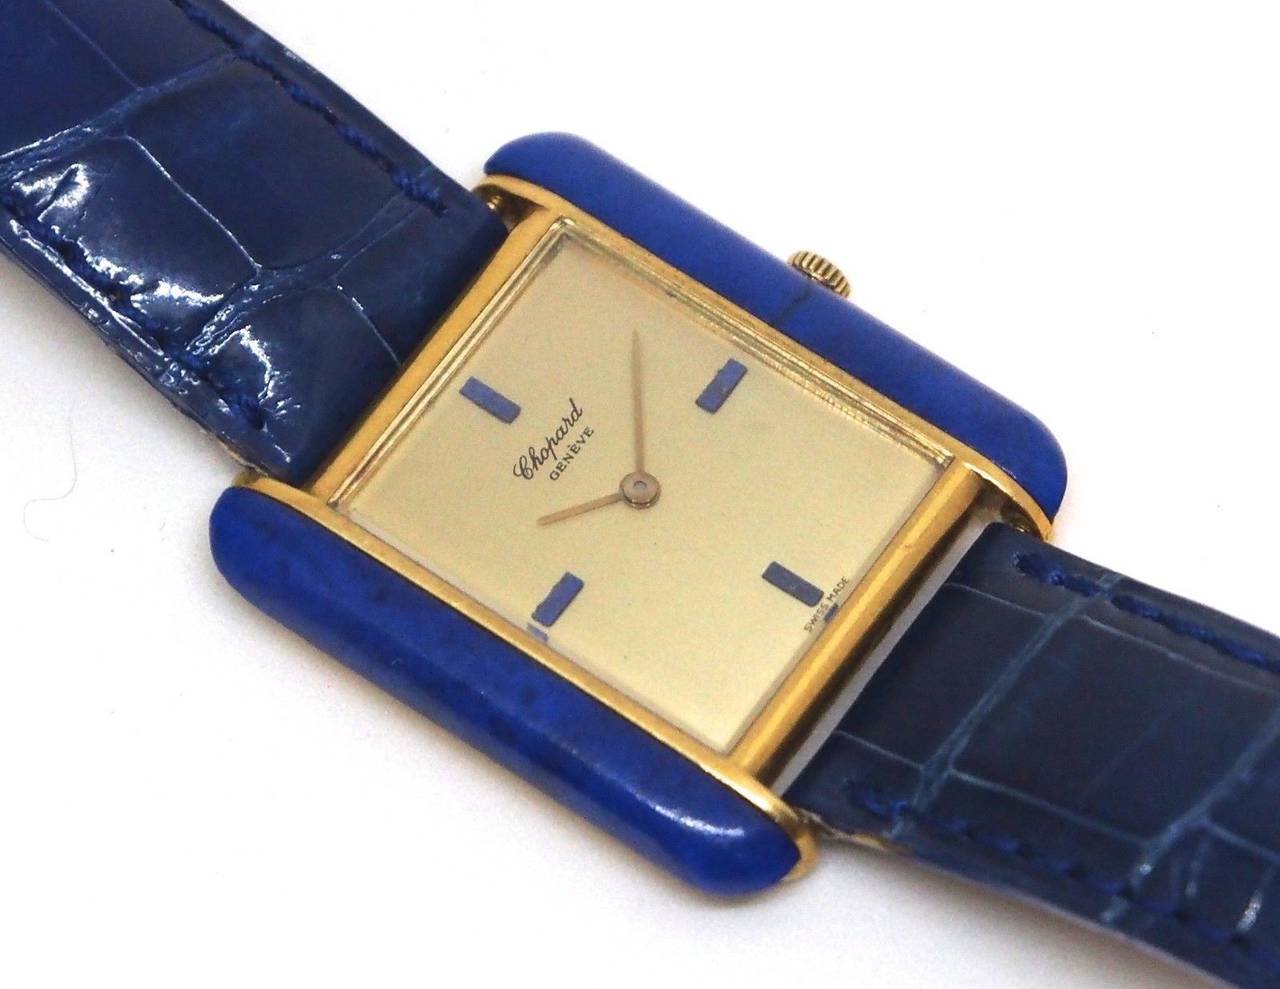 Brand Name:	Chopard
Ref. Number:	2021-1
Case Material:	18K Yellow Gold
Dial Color	: Gilt with Blue Hour Markers
Movement:	Manual-Wind, 17 Jewel
Case Diameter:	30mm x 33mm